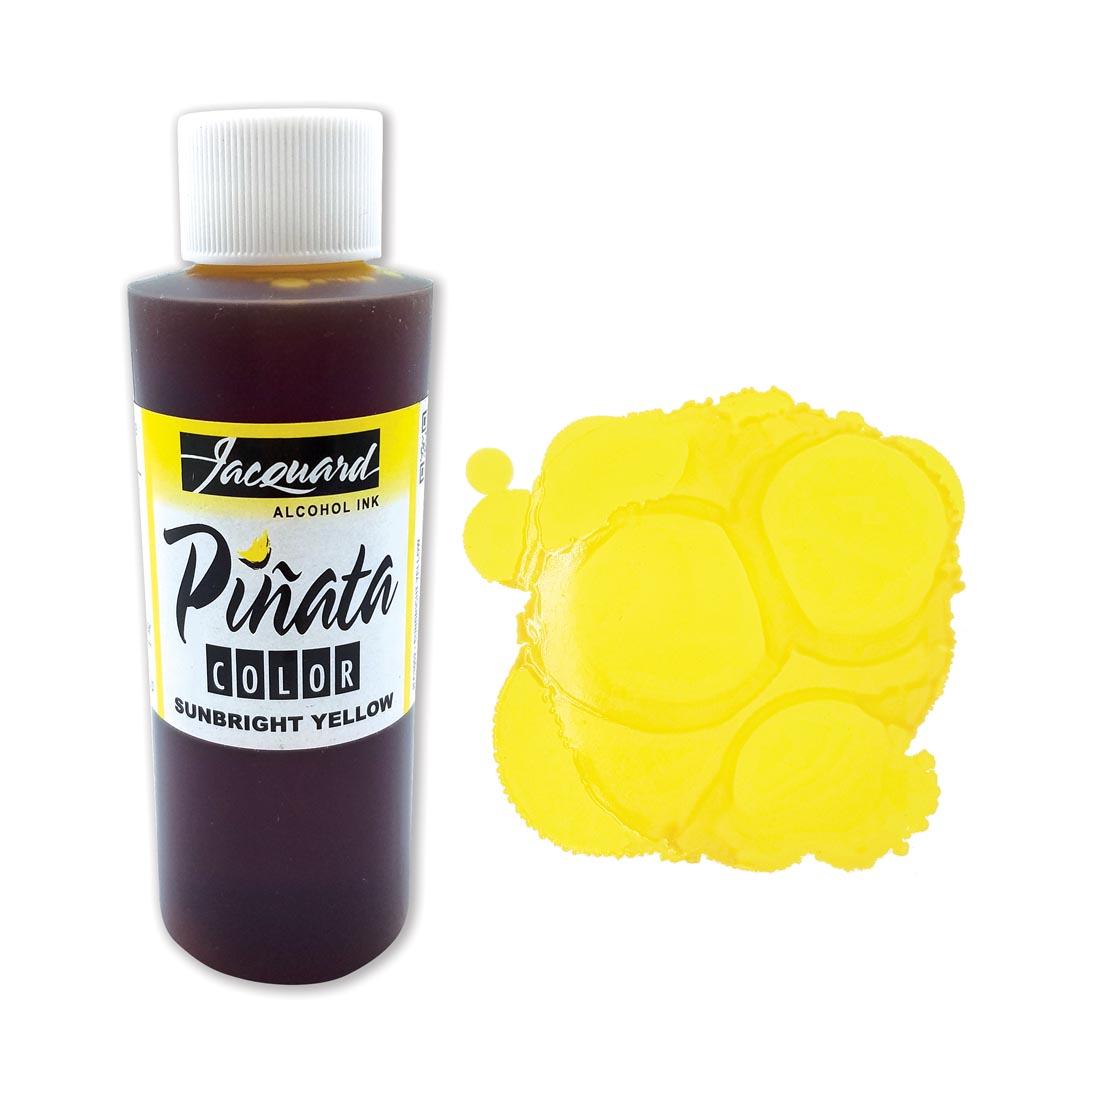 Bottle of Sunbright Yellow Jacquard Pinata Color Alcohol Ink beside an example color swatch